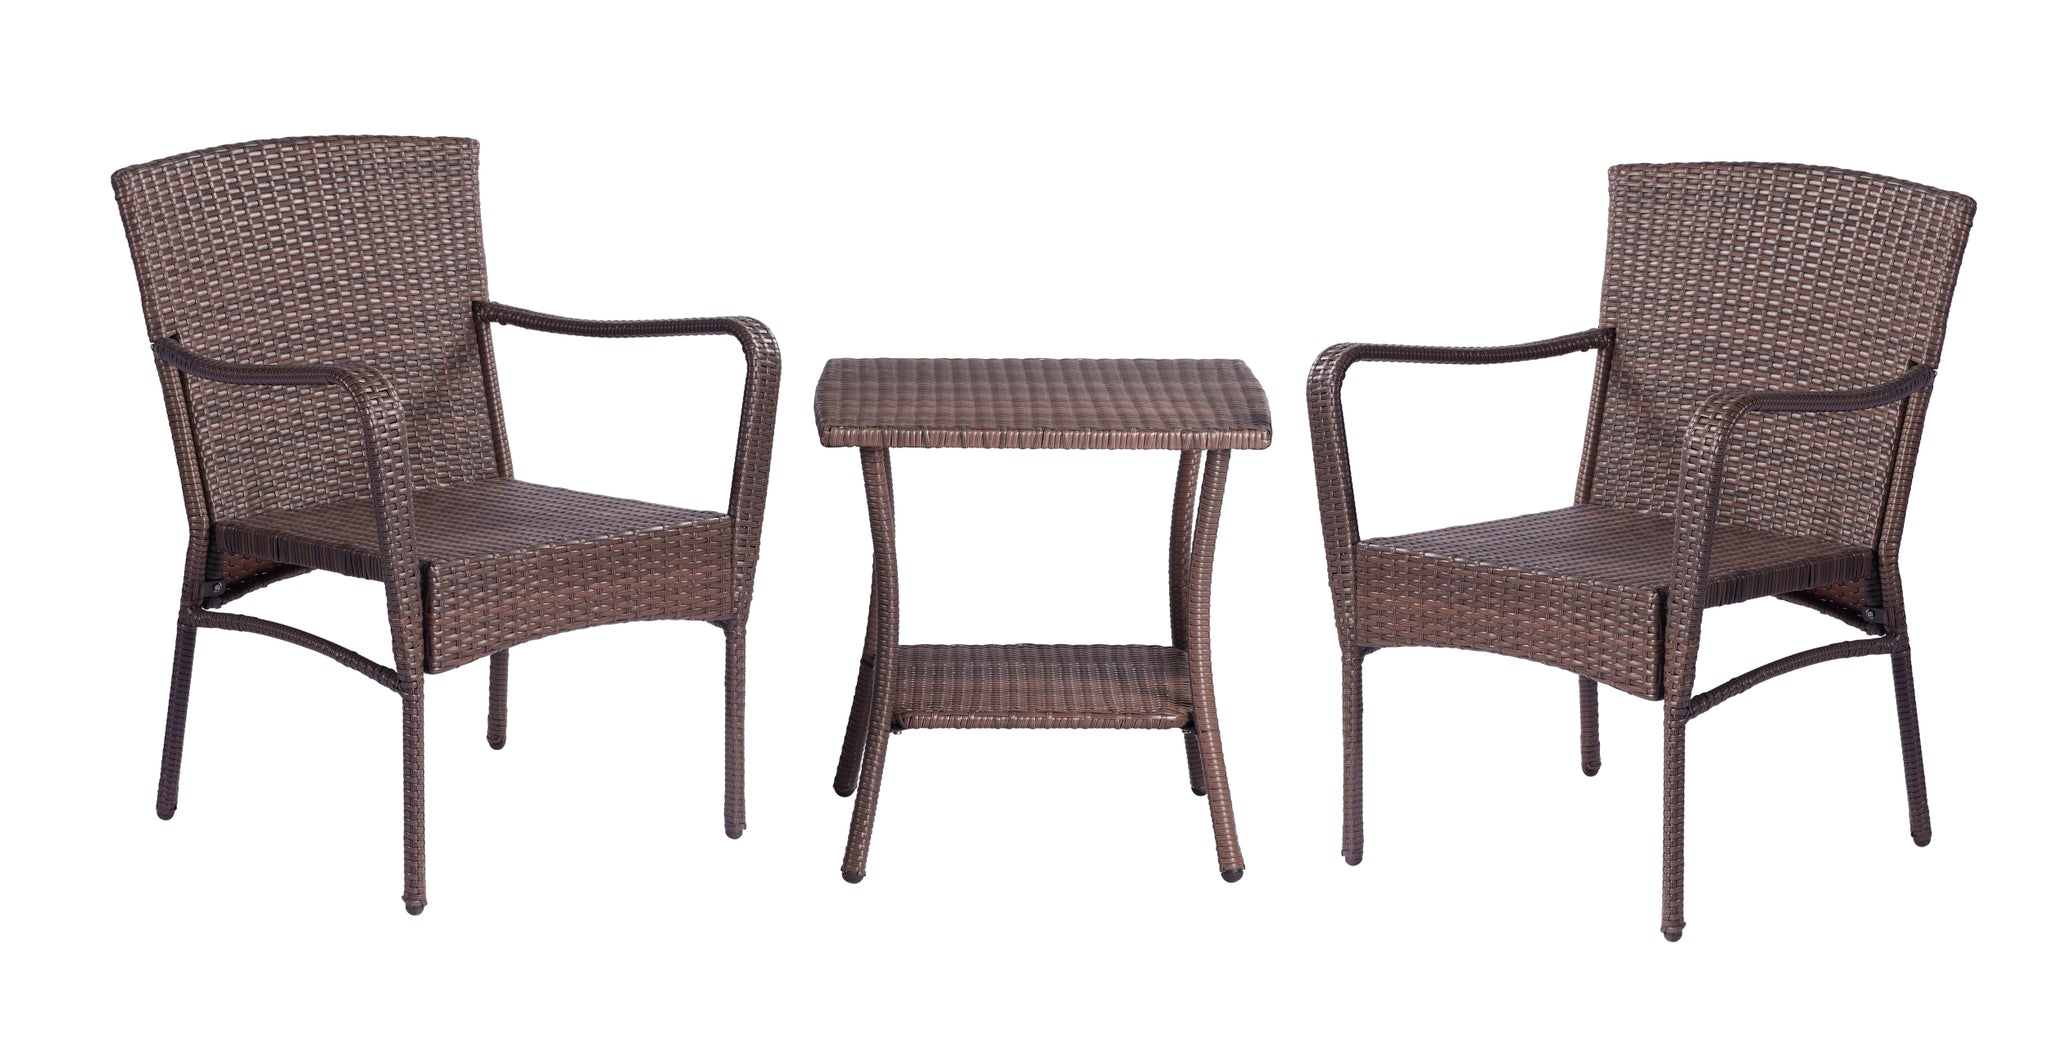 3 Pieces Outdoor Seating Group Furniture, Pe